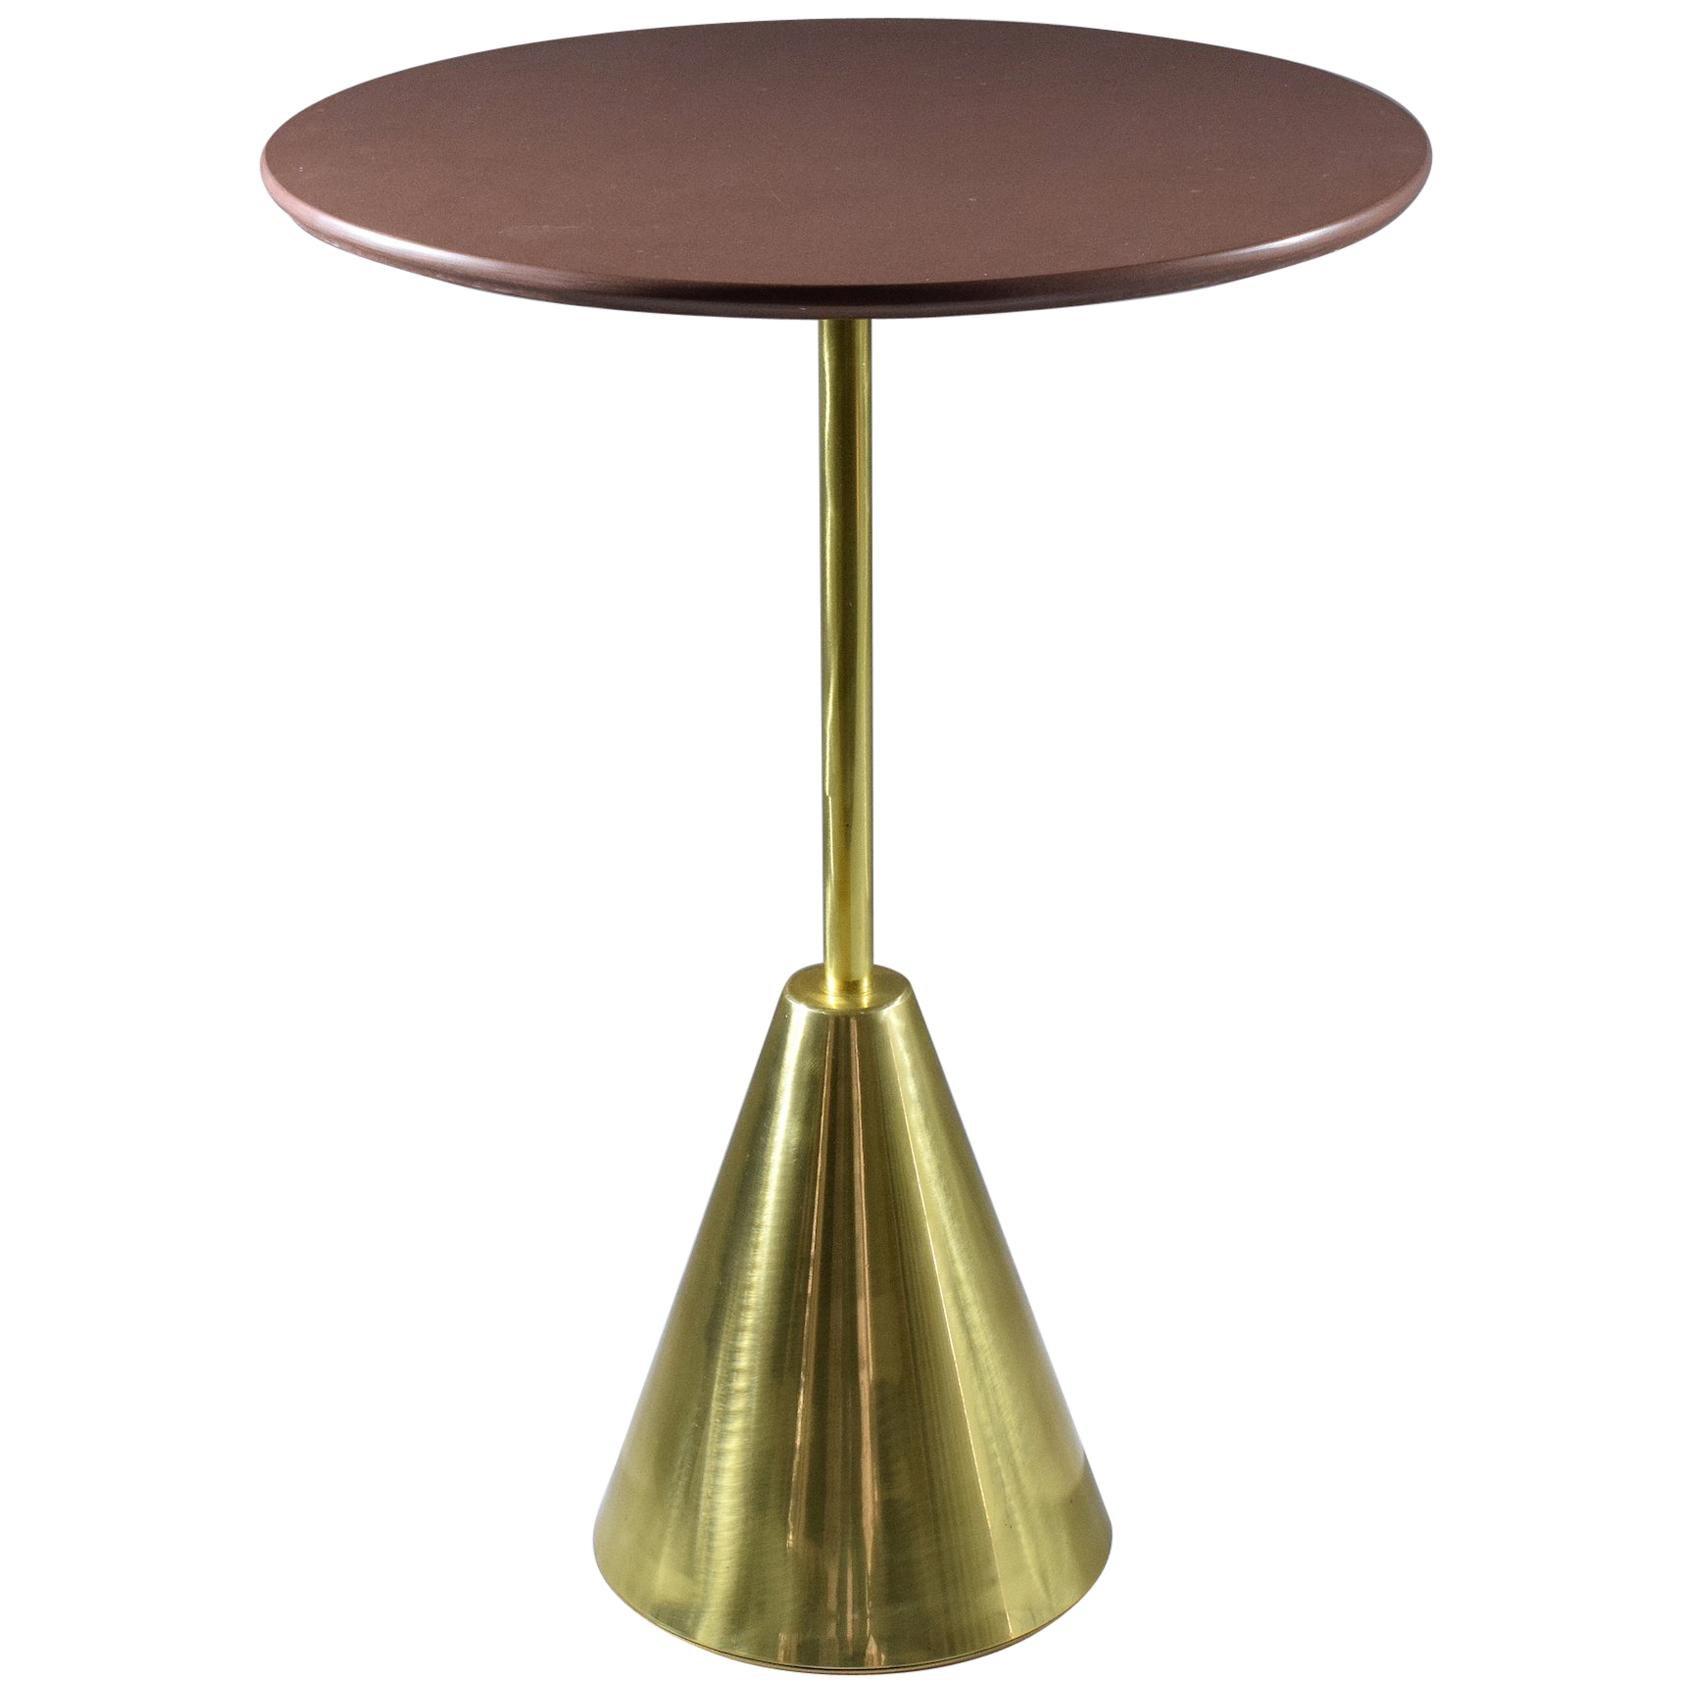 Stone-R Contemporary Handcrafted Brass Side Table, Flow Collection